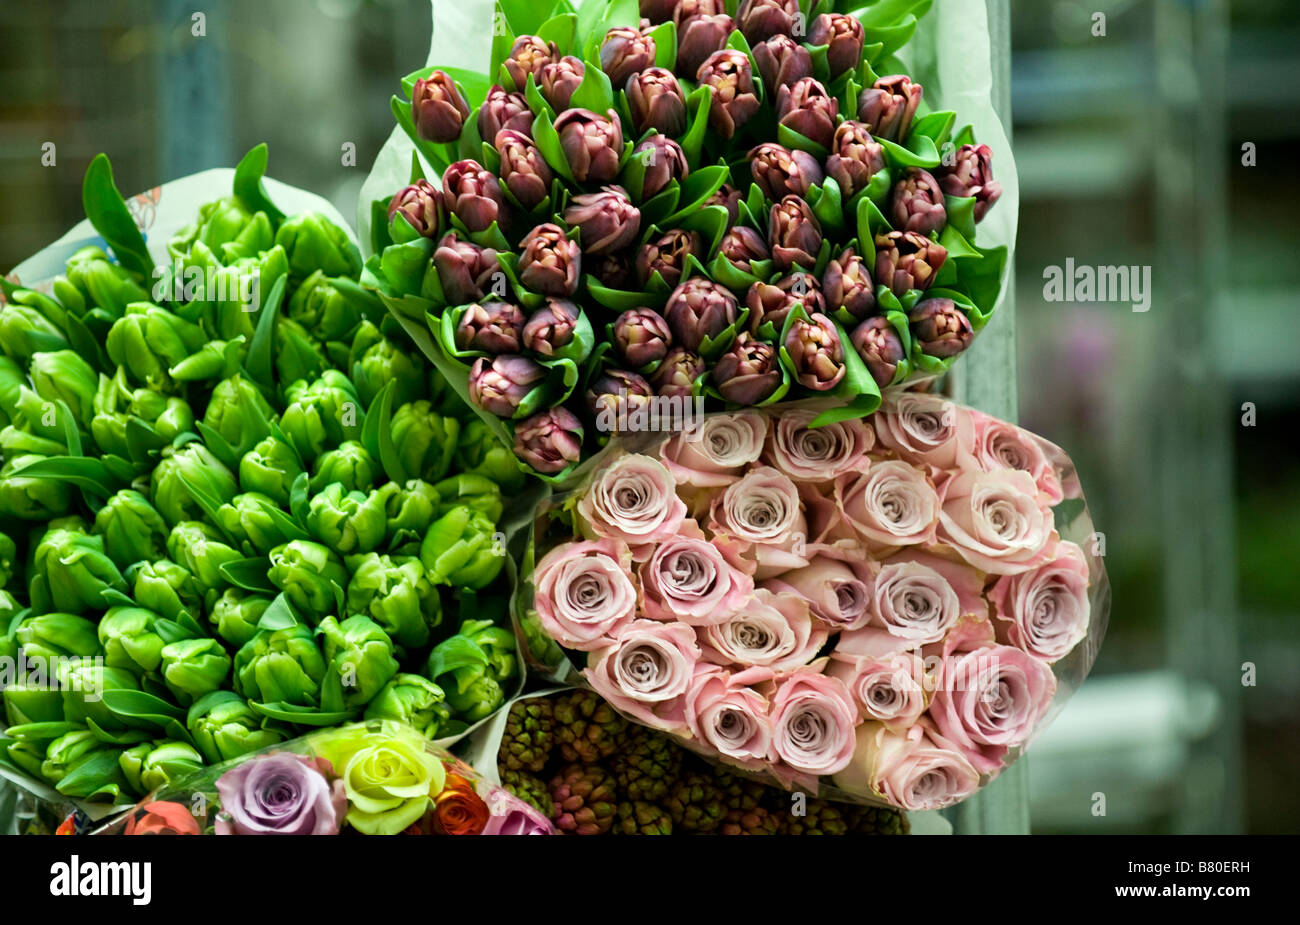 Bunches of flowers New Covent Garden Flower Market Stock Photo